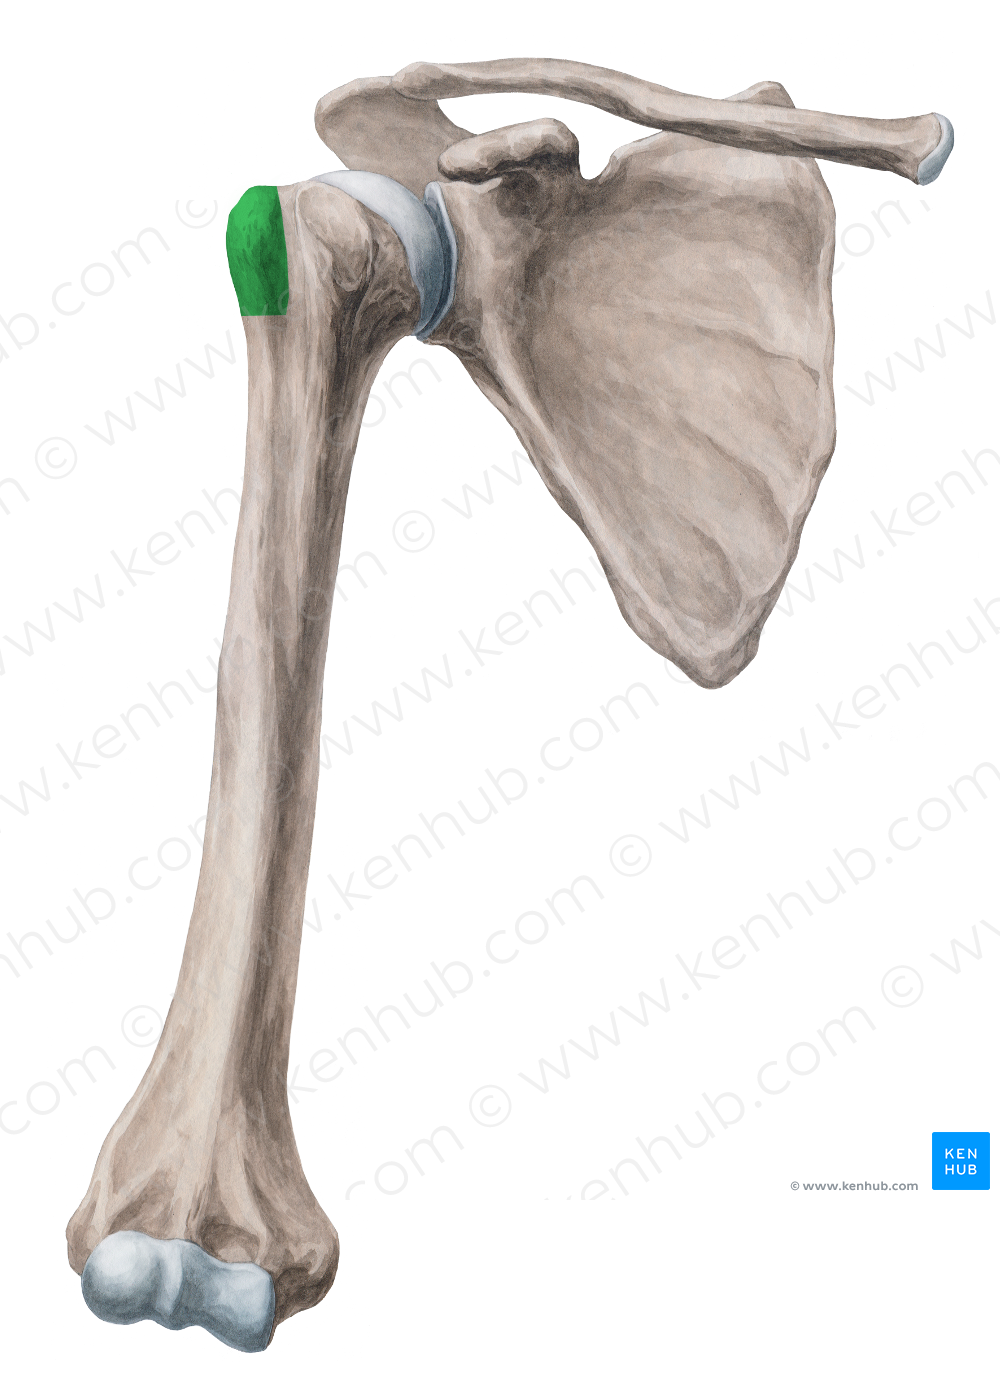 Greater tubercle of humerus (#9734)